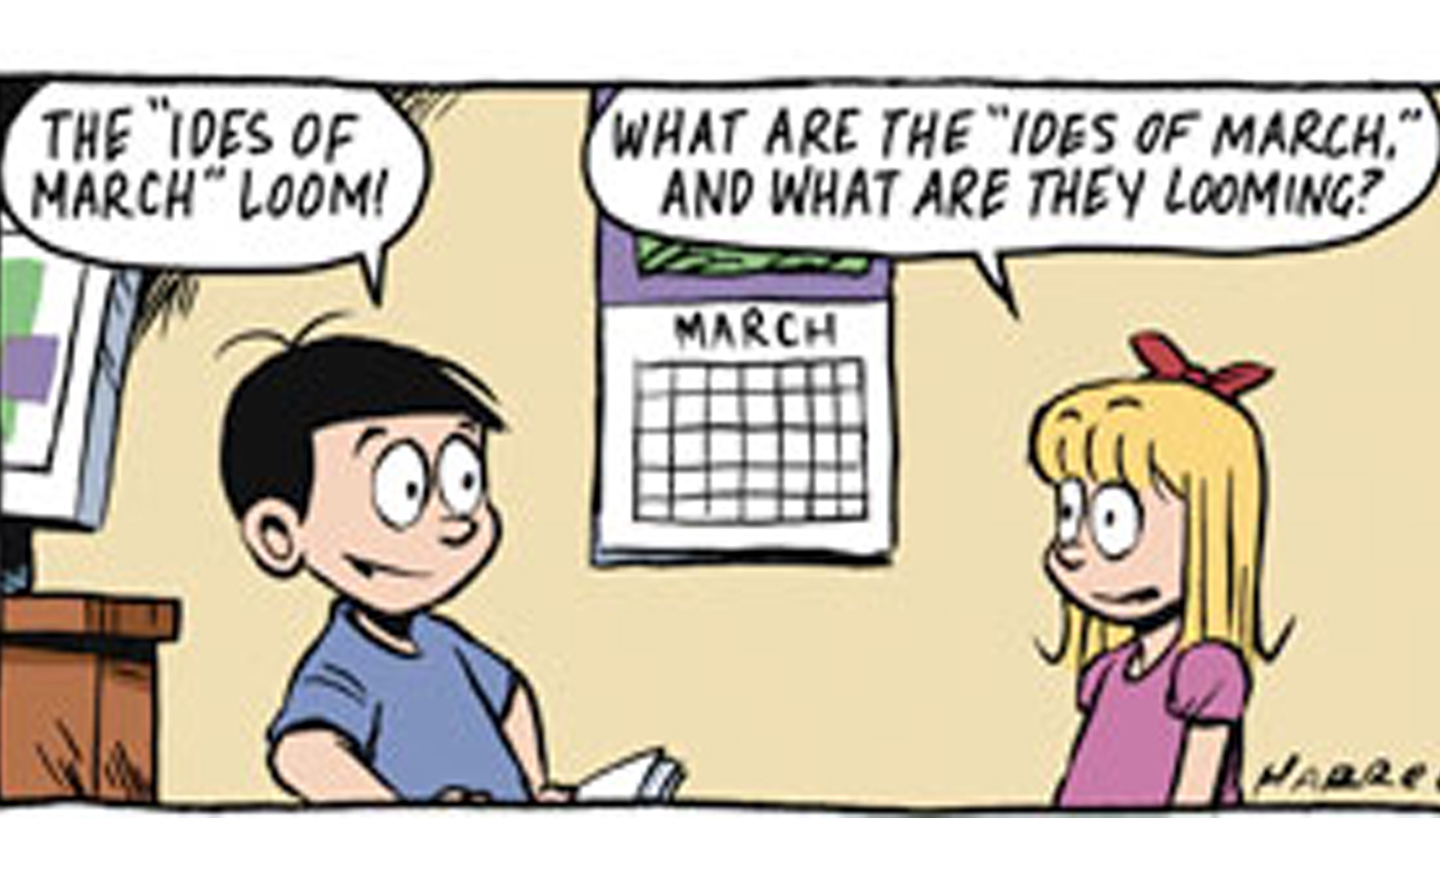 Be Warned! The Ides of March Comics are Upon Us!